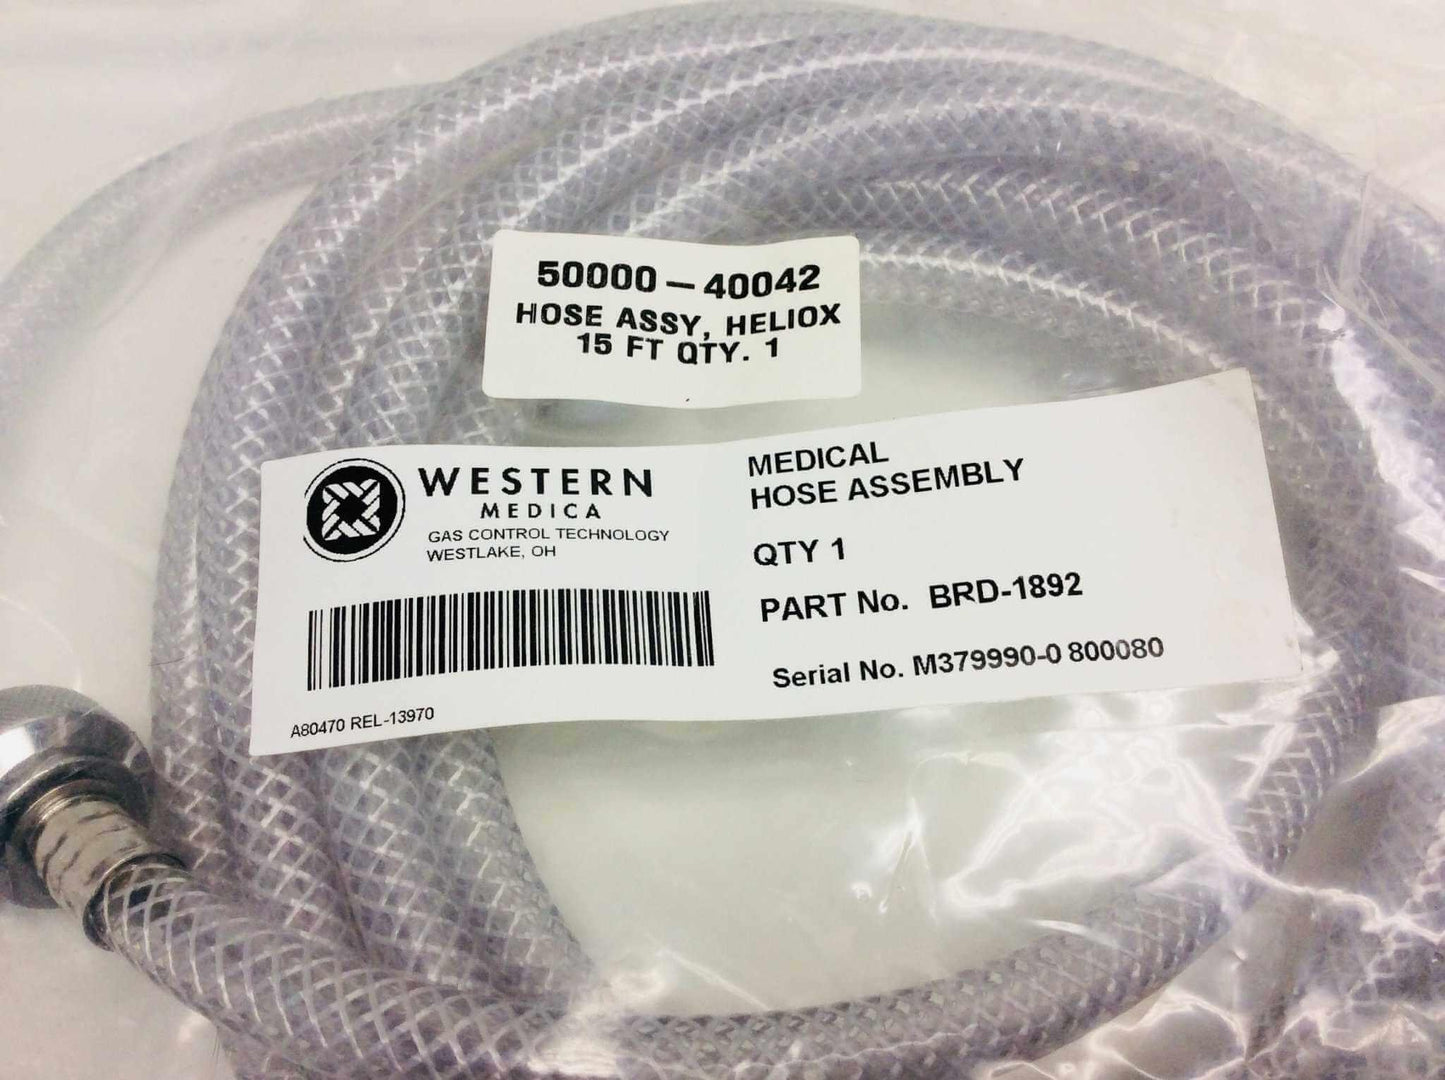 NEW Western Medica Viasys Heliox Medical Hose Assembly 15" FT 50000-40042 Warranty FREE Shipping - MBR Medicals